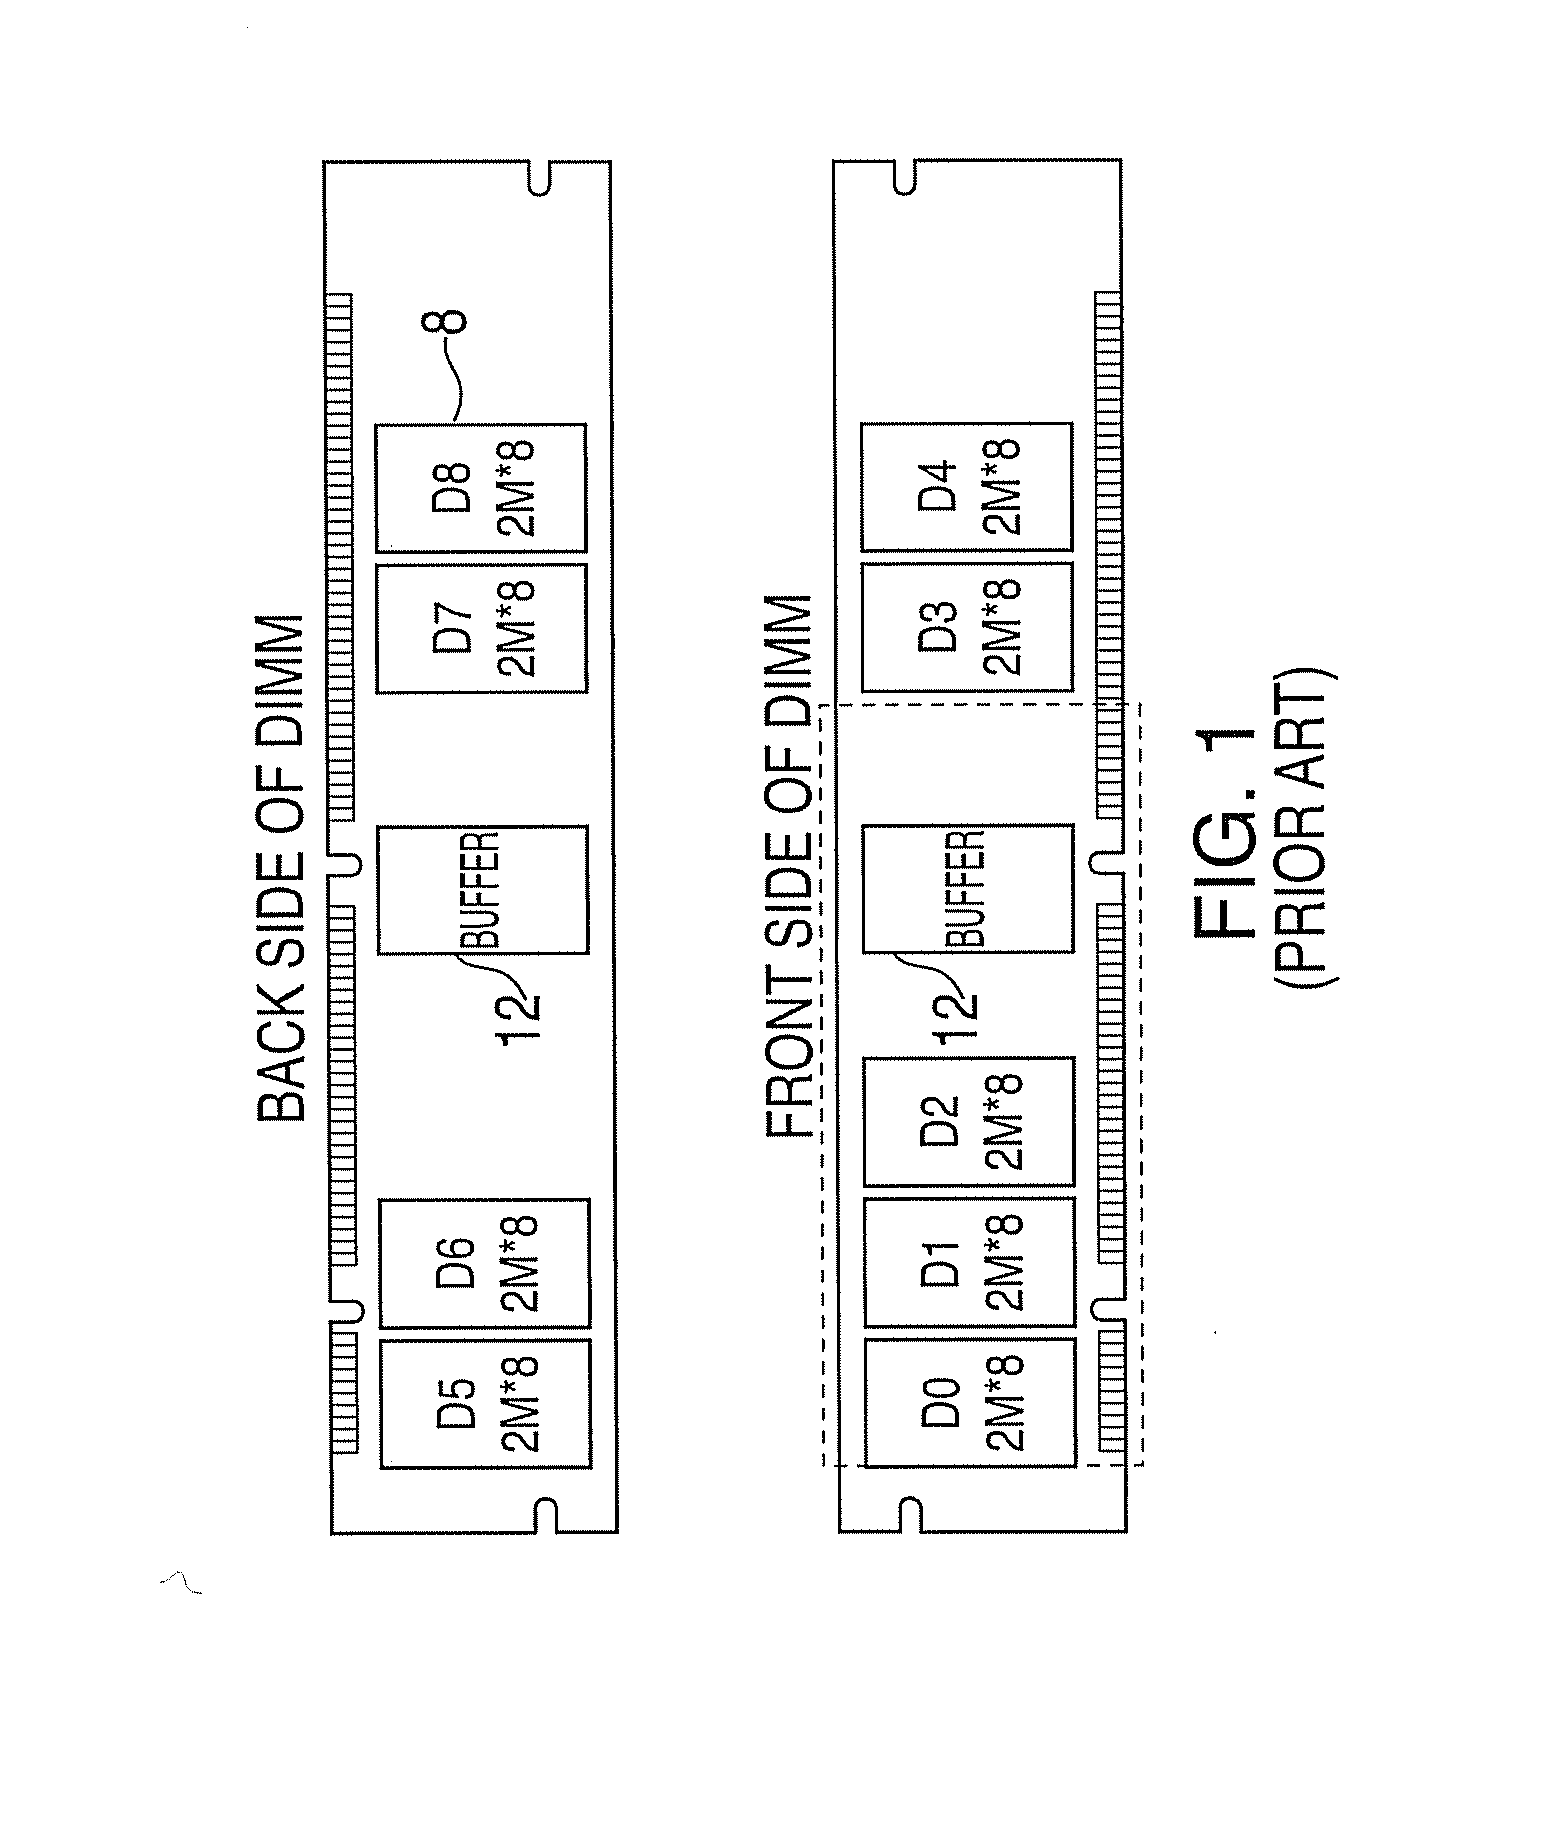 System and method for providing synchronous dynamic random access memory (SDRAM) mode register shadowing in a memory system